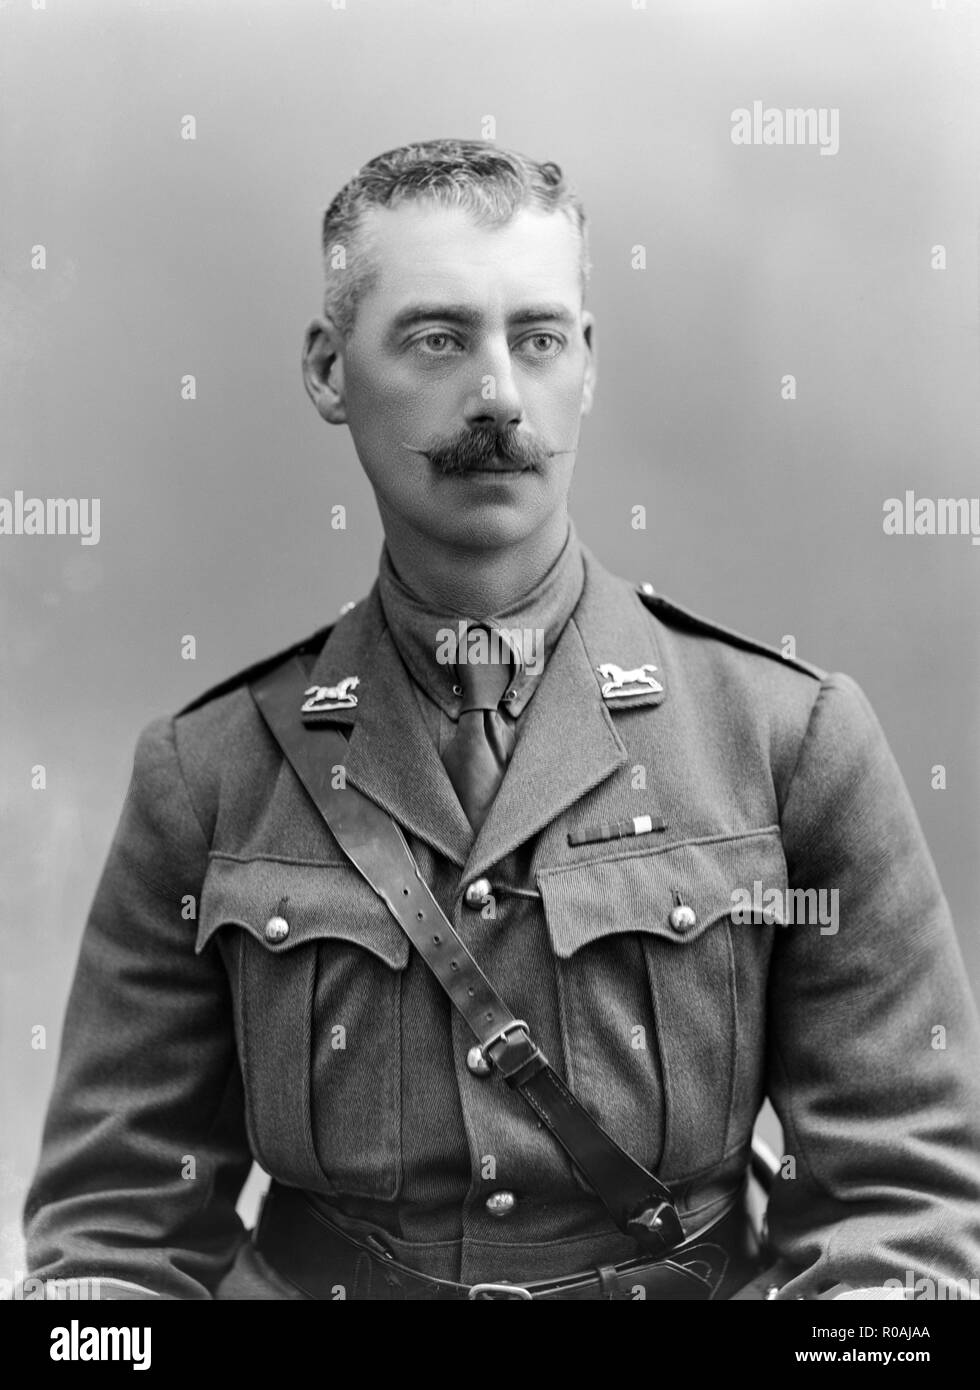 Portrait photograph taken on 14th June 1915, showing Lieutenant W. M. Butler of the 3rd King's Own Hussars. The photograph was taken in a London studio, and shows the officer in full uniform. Stock Photo